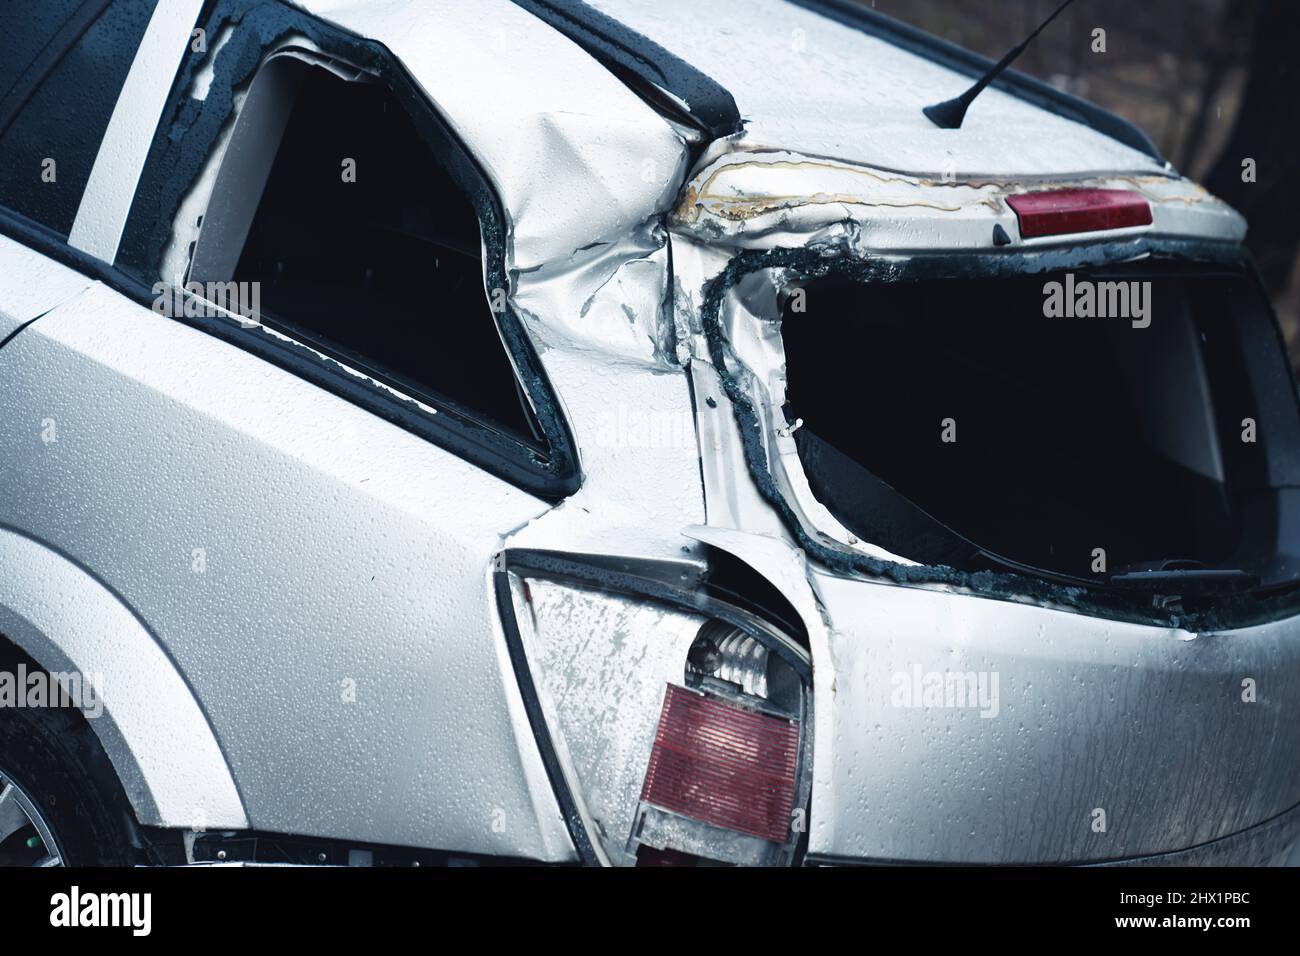 Deteriorated rear end of a urban hatchback car crashed. High quality photo Stock Photo